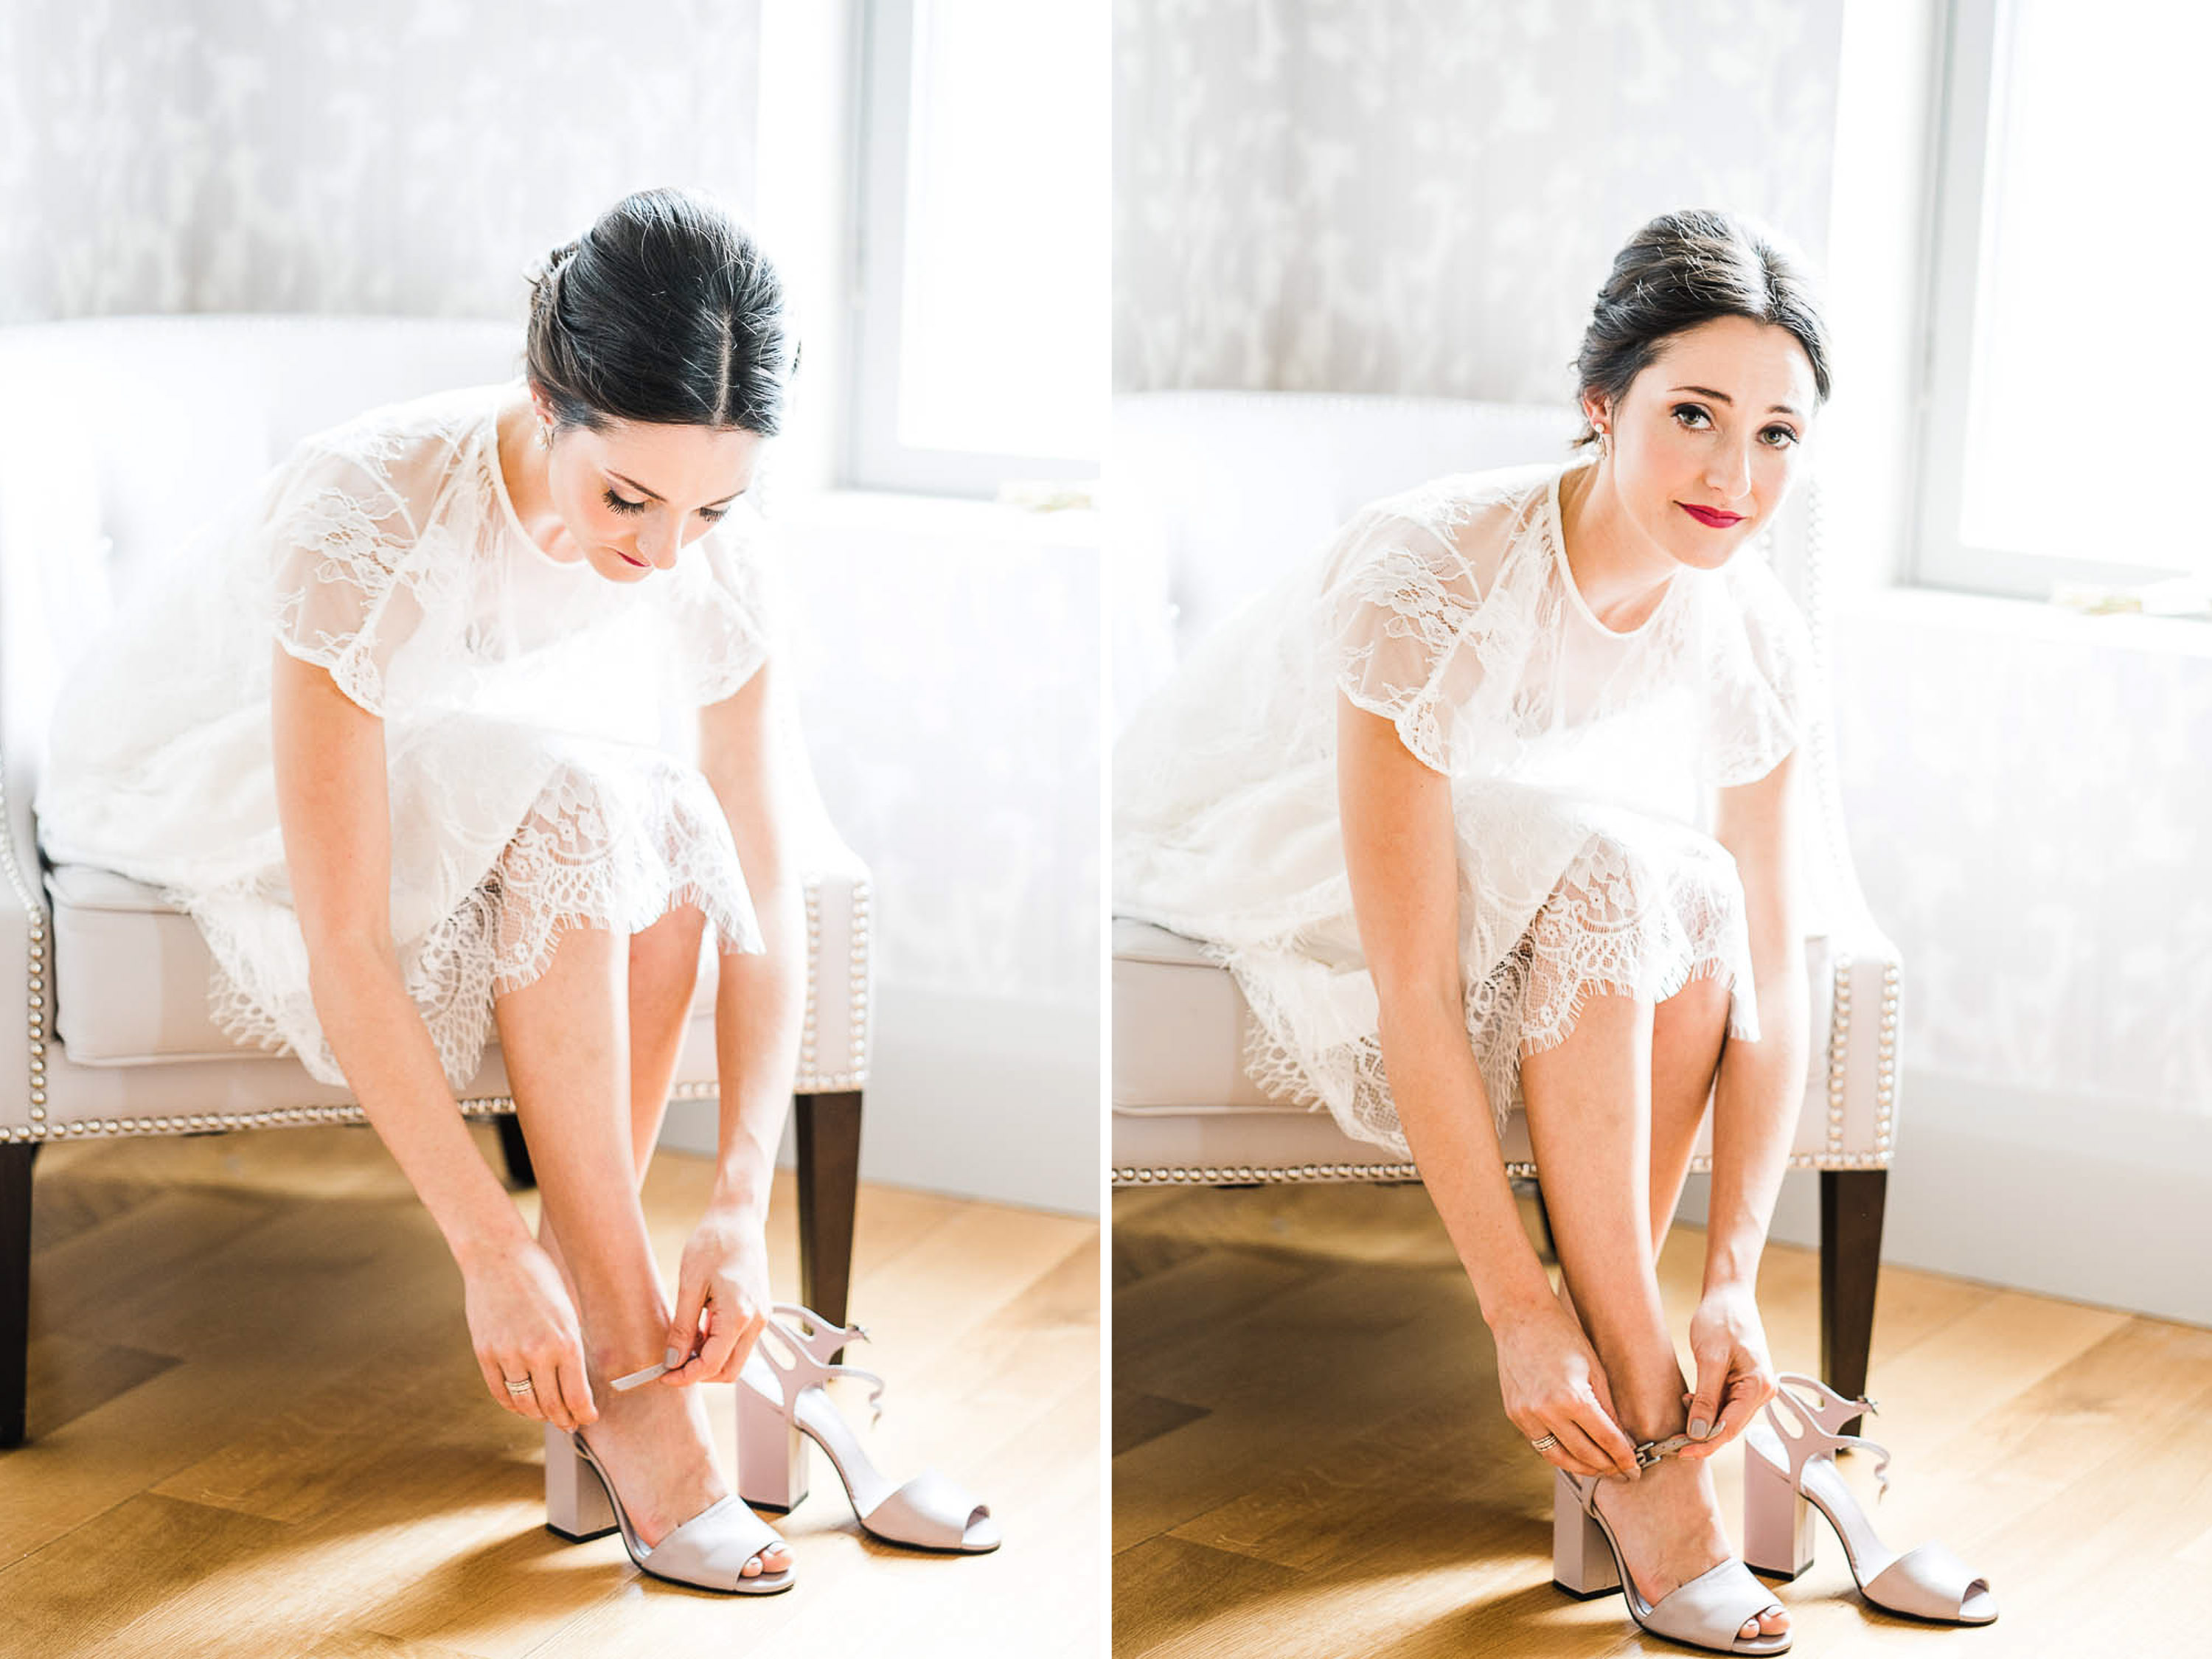 Bride in simple white dress putting shoes on. Sunlight streaming through window.